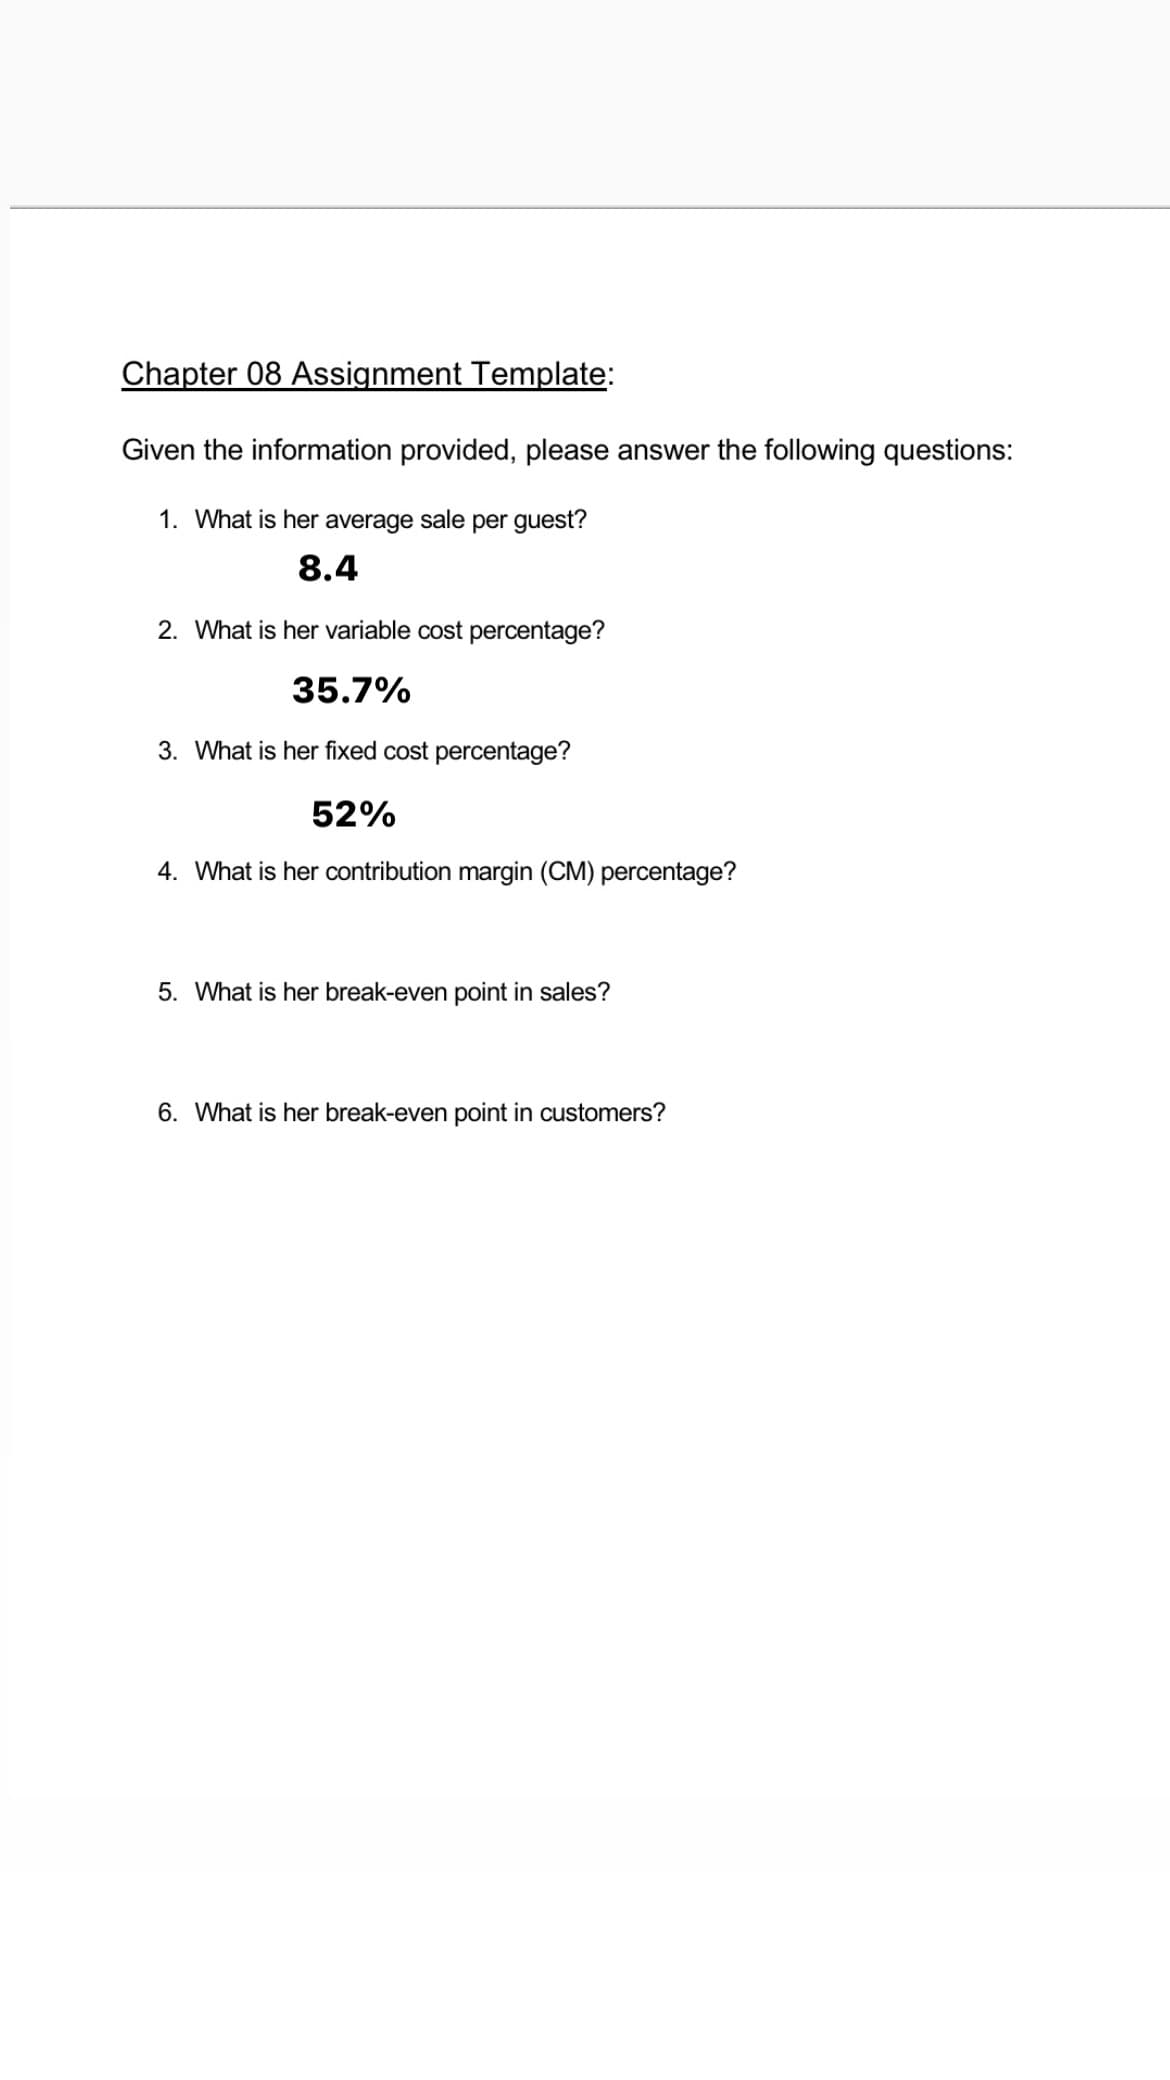 Chapter 08 Assignment Template:
Given the information provided, please answer the following questions:
1. What is her average sale per guest?
8.4
2. What is her variable cost percentage?
35.7%
3. What is her fixed cost percentage?
52%
4. What is her contribution margin (CM) percentage?
5. What is her break-even point in sales?
6. What is her break-even point in customers?